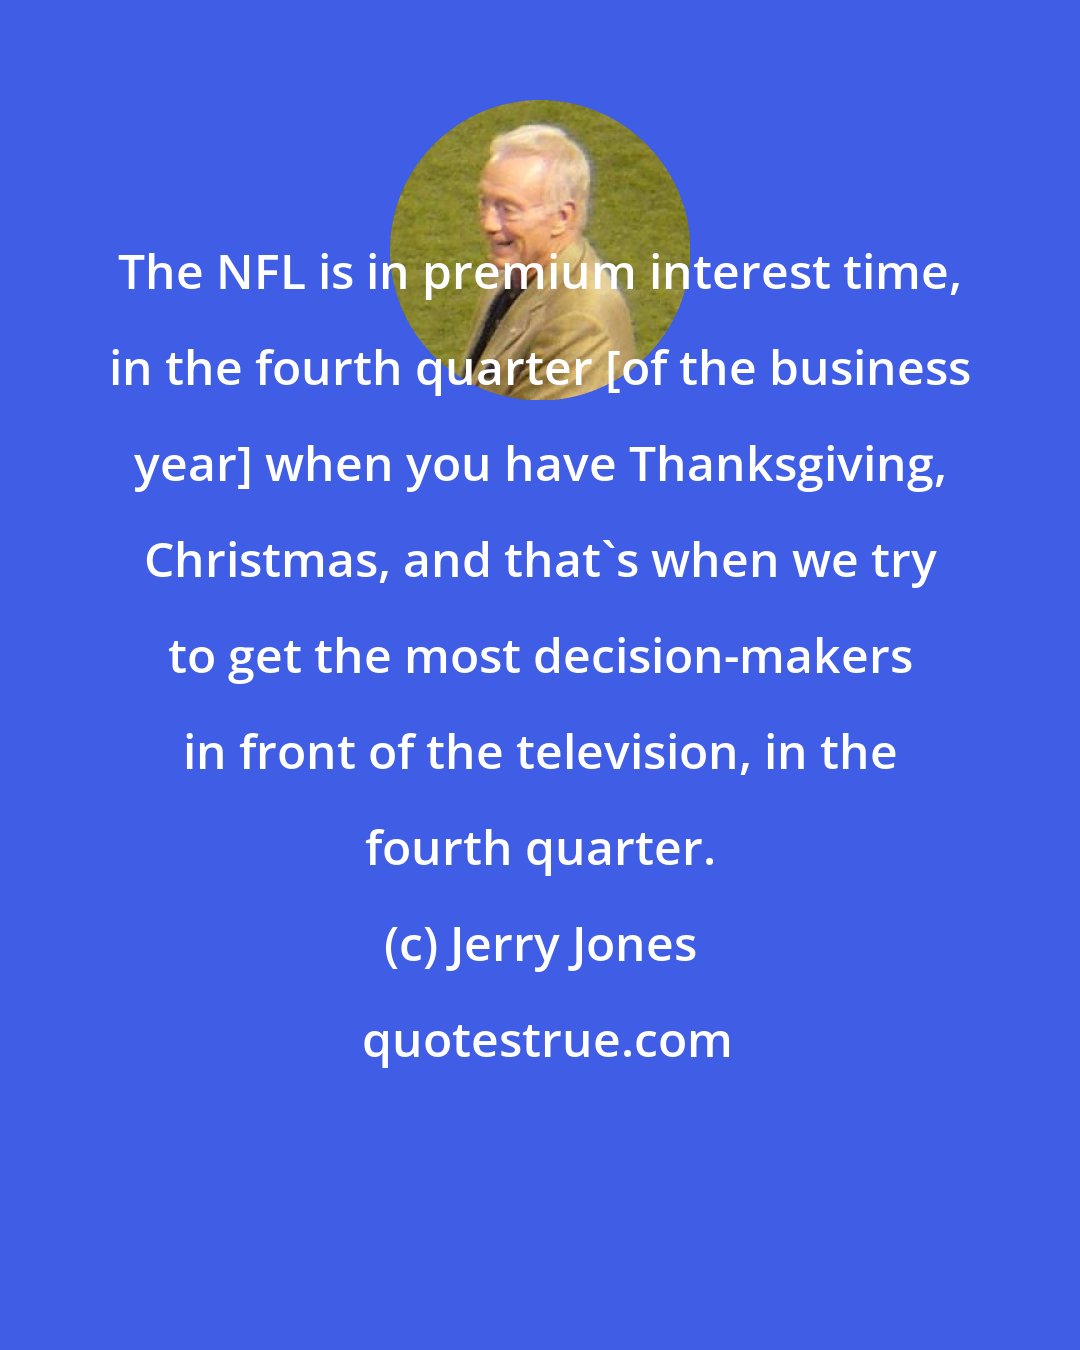 Jerry Jones: The NFL is in premium interest time, in the fourth quarter [of the business year] when you have Thanksgiving, Christmas, and that's when we try to get the most decision-makers in front of the television, in the fourth quarter.